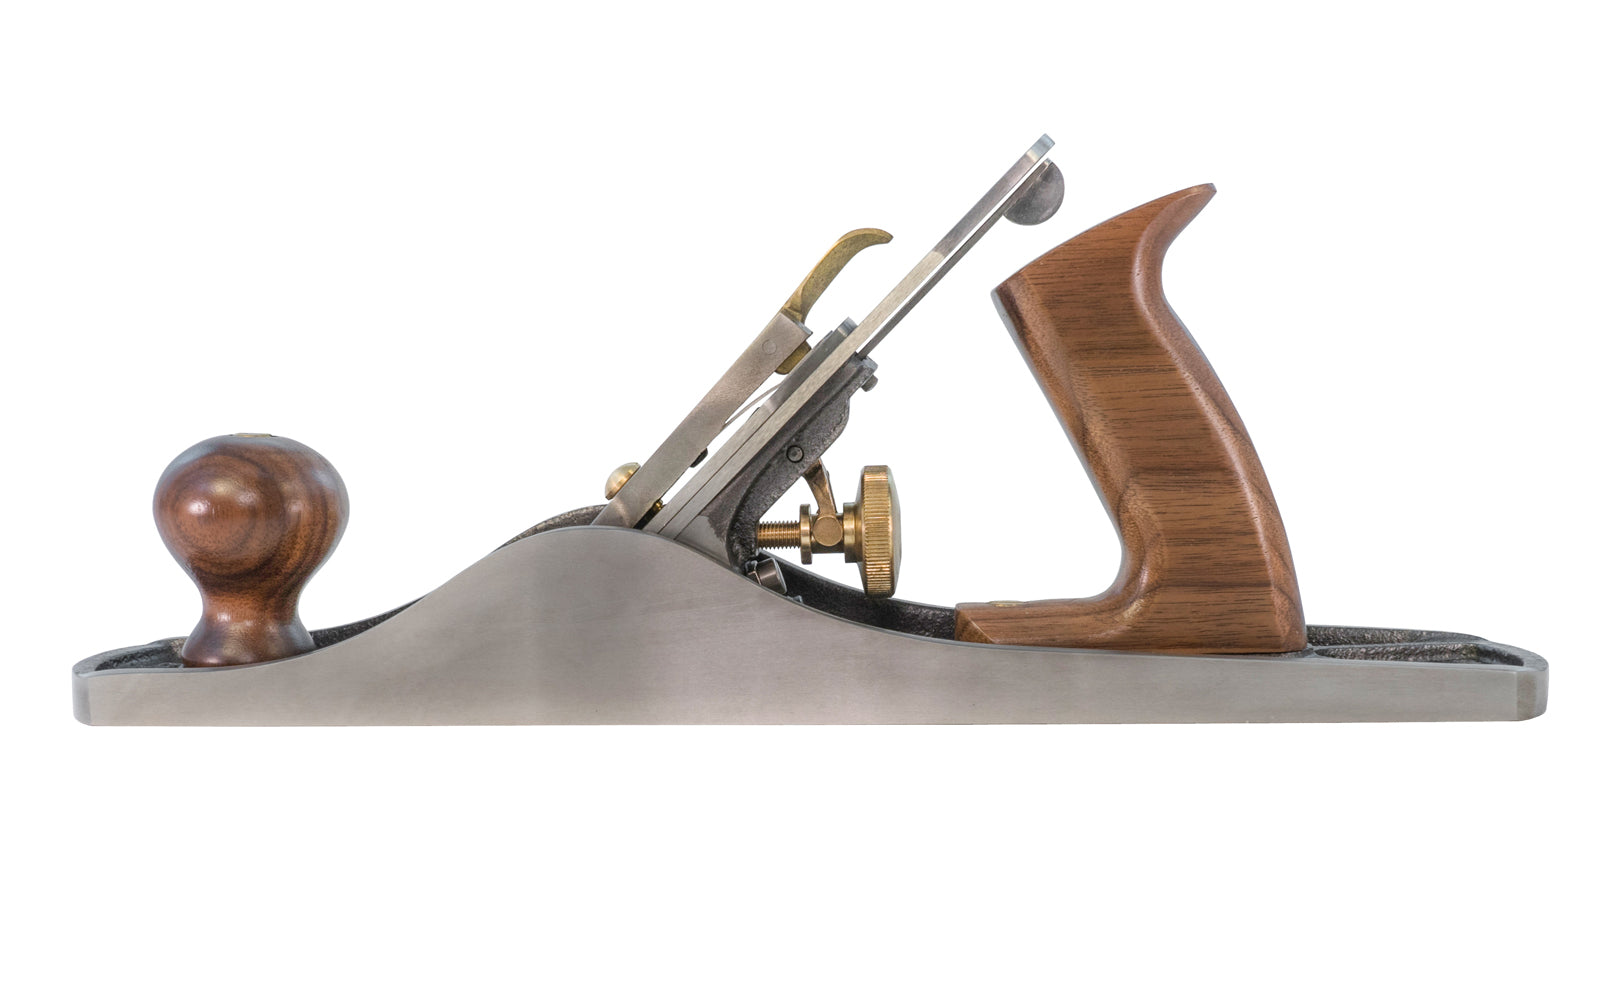 Clifton No. 5 Jack Bench Plane. Cutting Iron is made from cryogenically treated 01 steel, hardened & tempered to 60-62 Rockwell C, precision ground & 0.120" thick (3mm). 1-2" (50 mm) wide cutter blade. Knob & handle are carefully shaped, sanded & sealed from Walnut. Clifton model C5. Made in Sheffield, England.